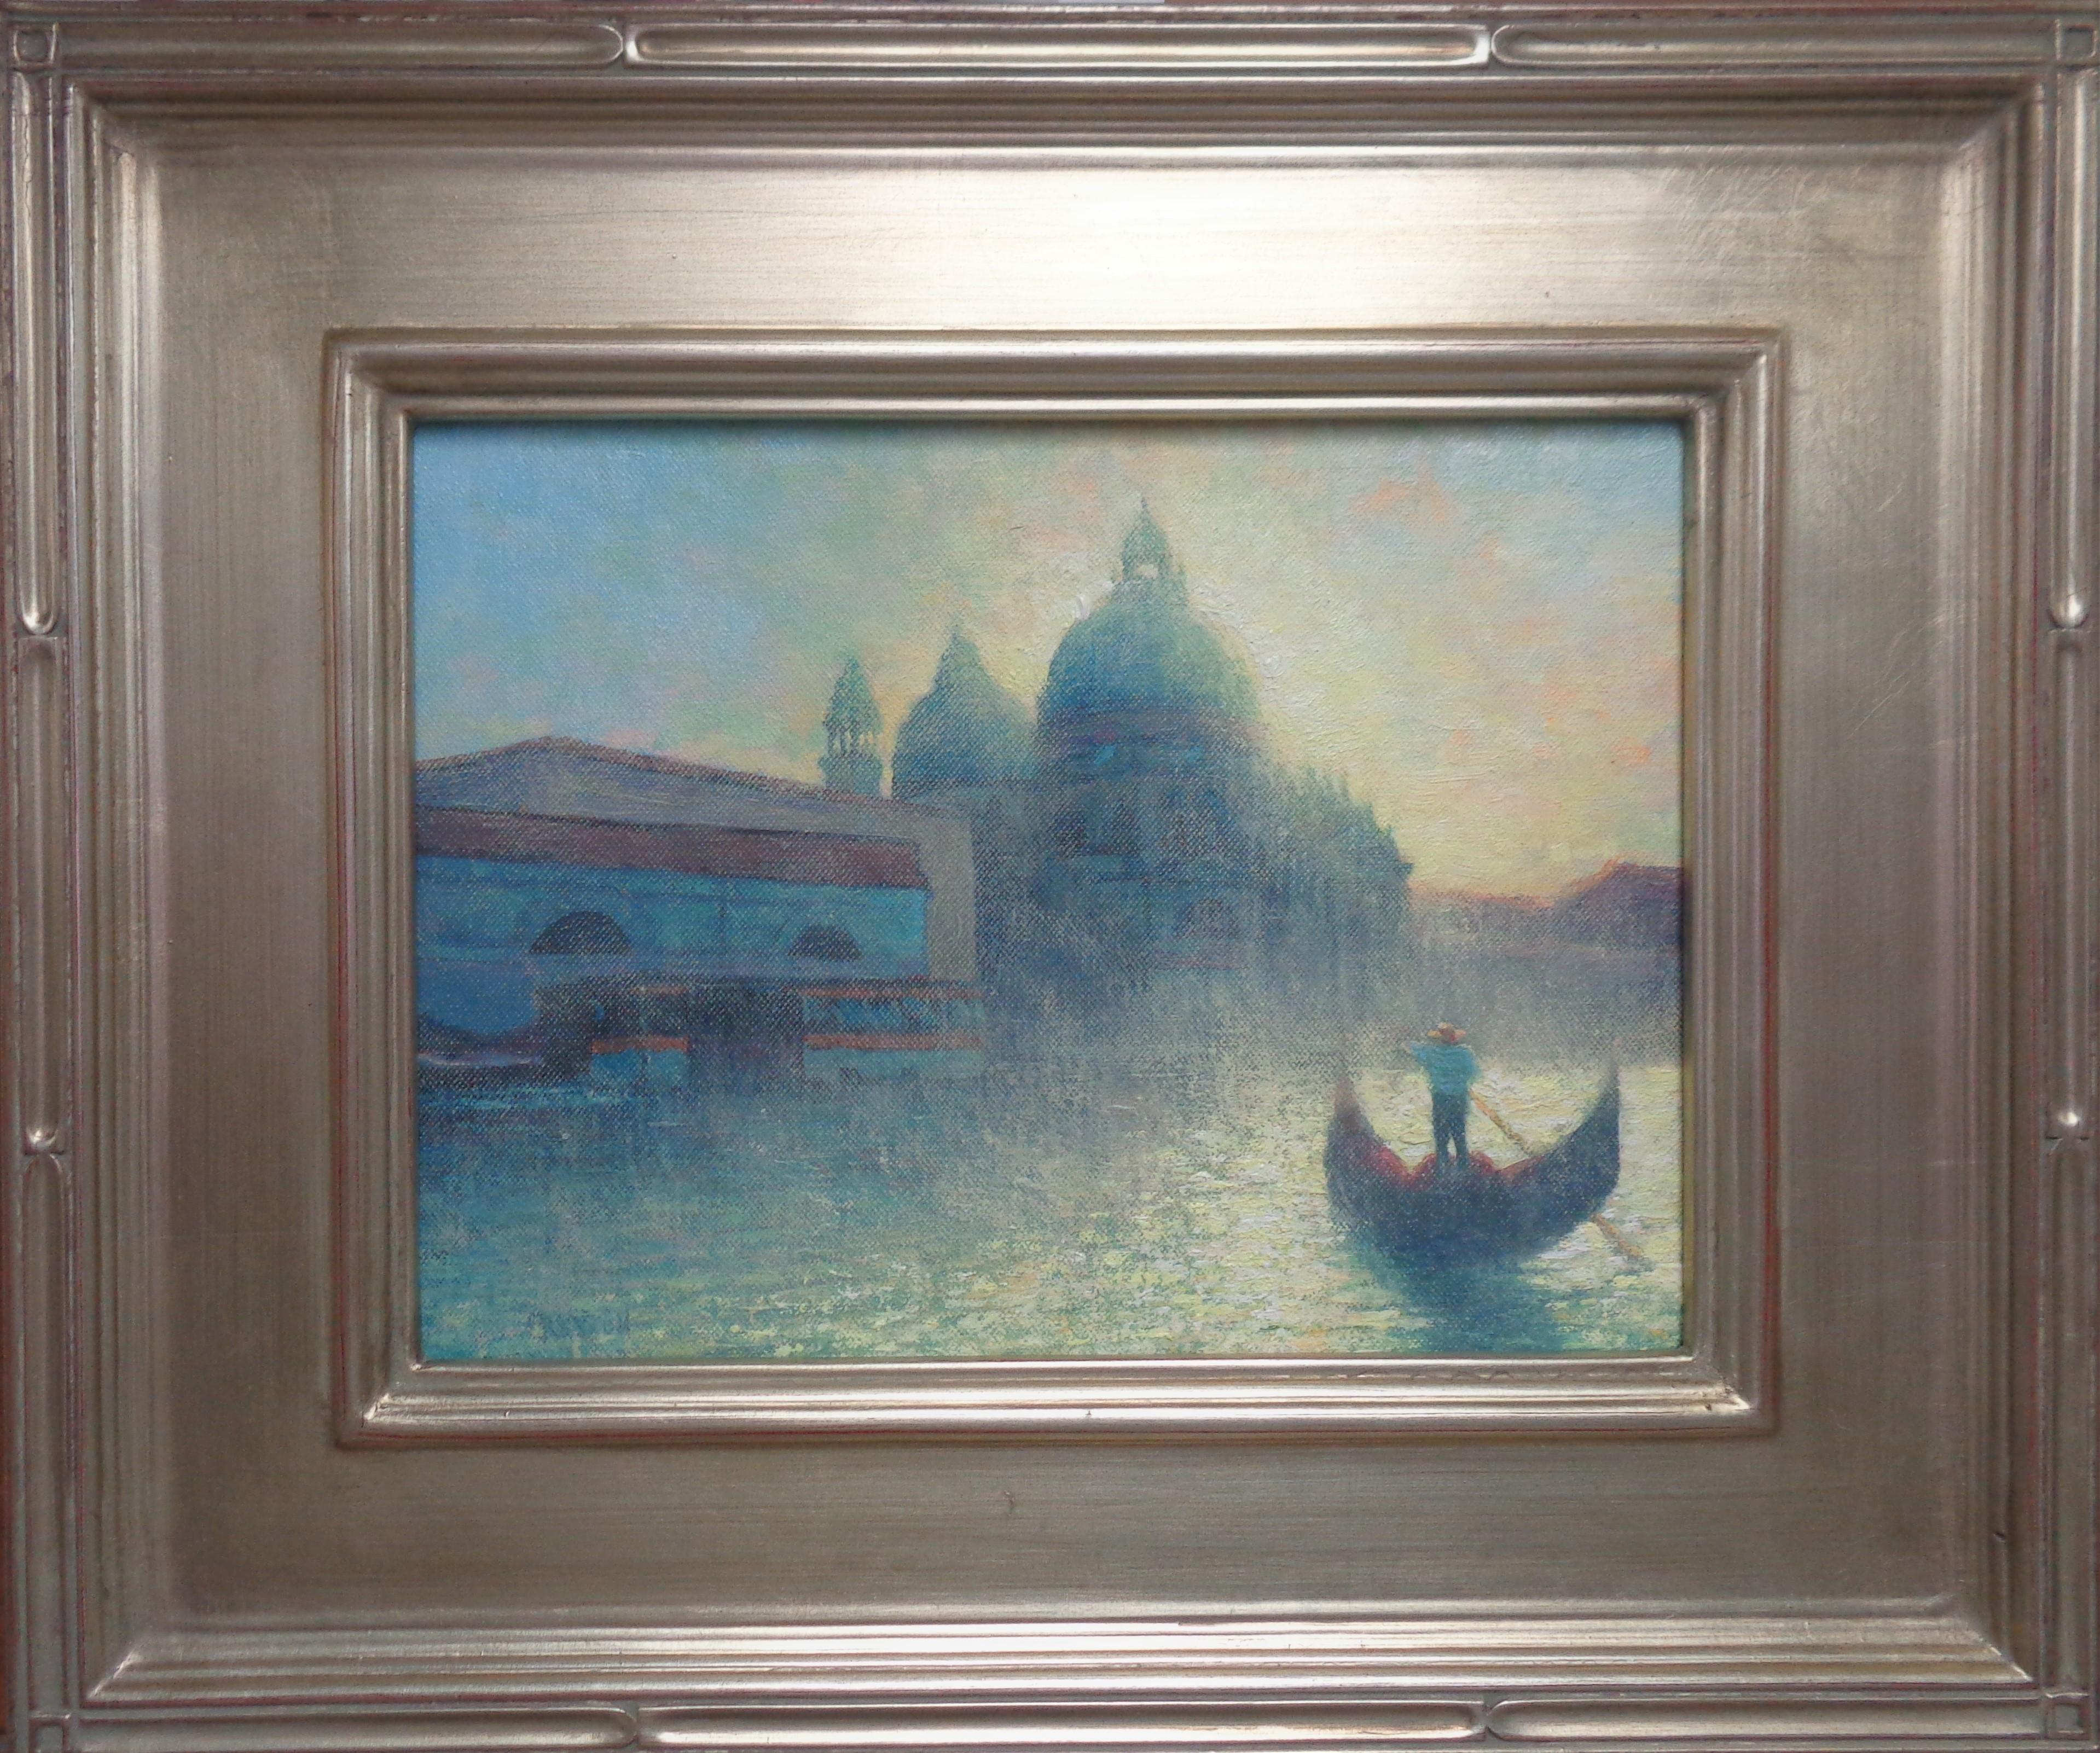 Morning Light Venice is a beautiful  oil painting on canvas panel by award winning contemporary artist Michael Budden that showcases a gondolier heading to shore as the sum is rising behind the buildings. The image is 9 x 12 unframed. 
ARTIST'S